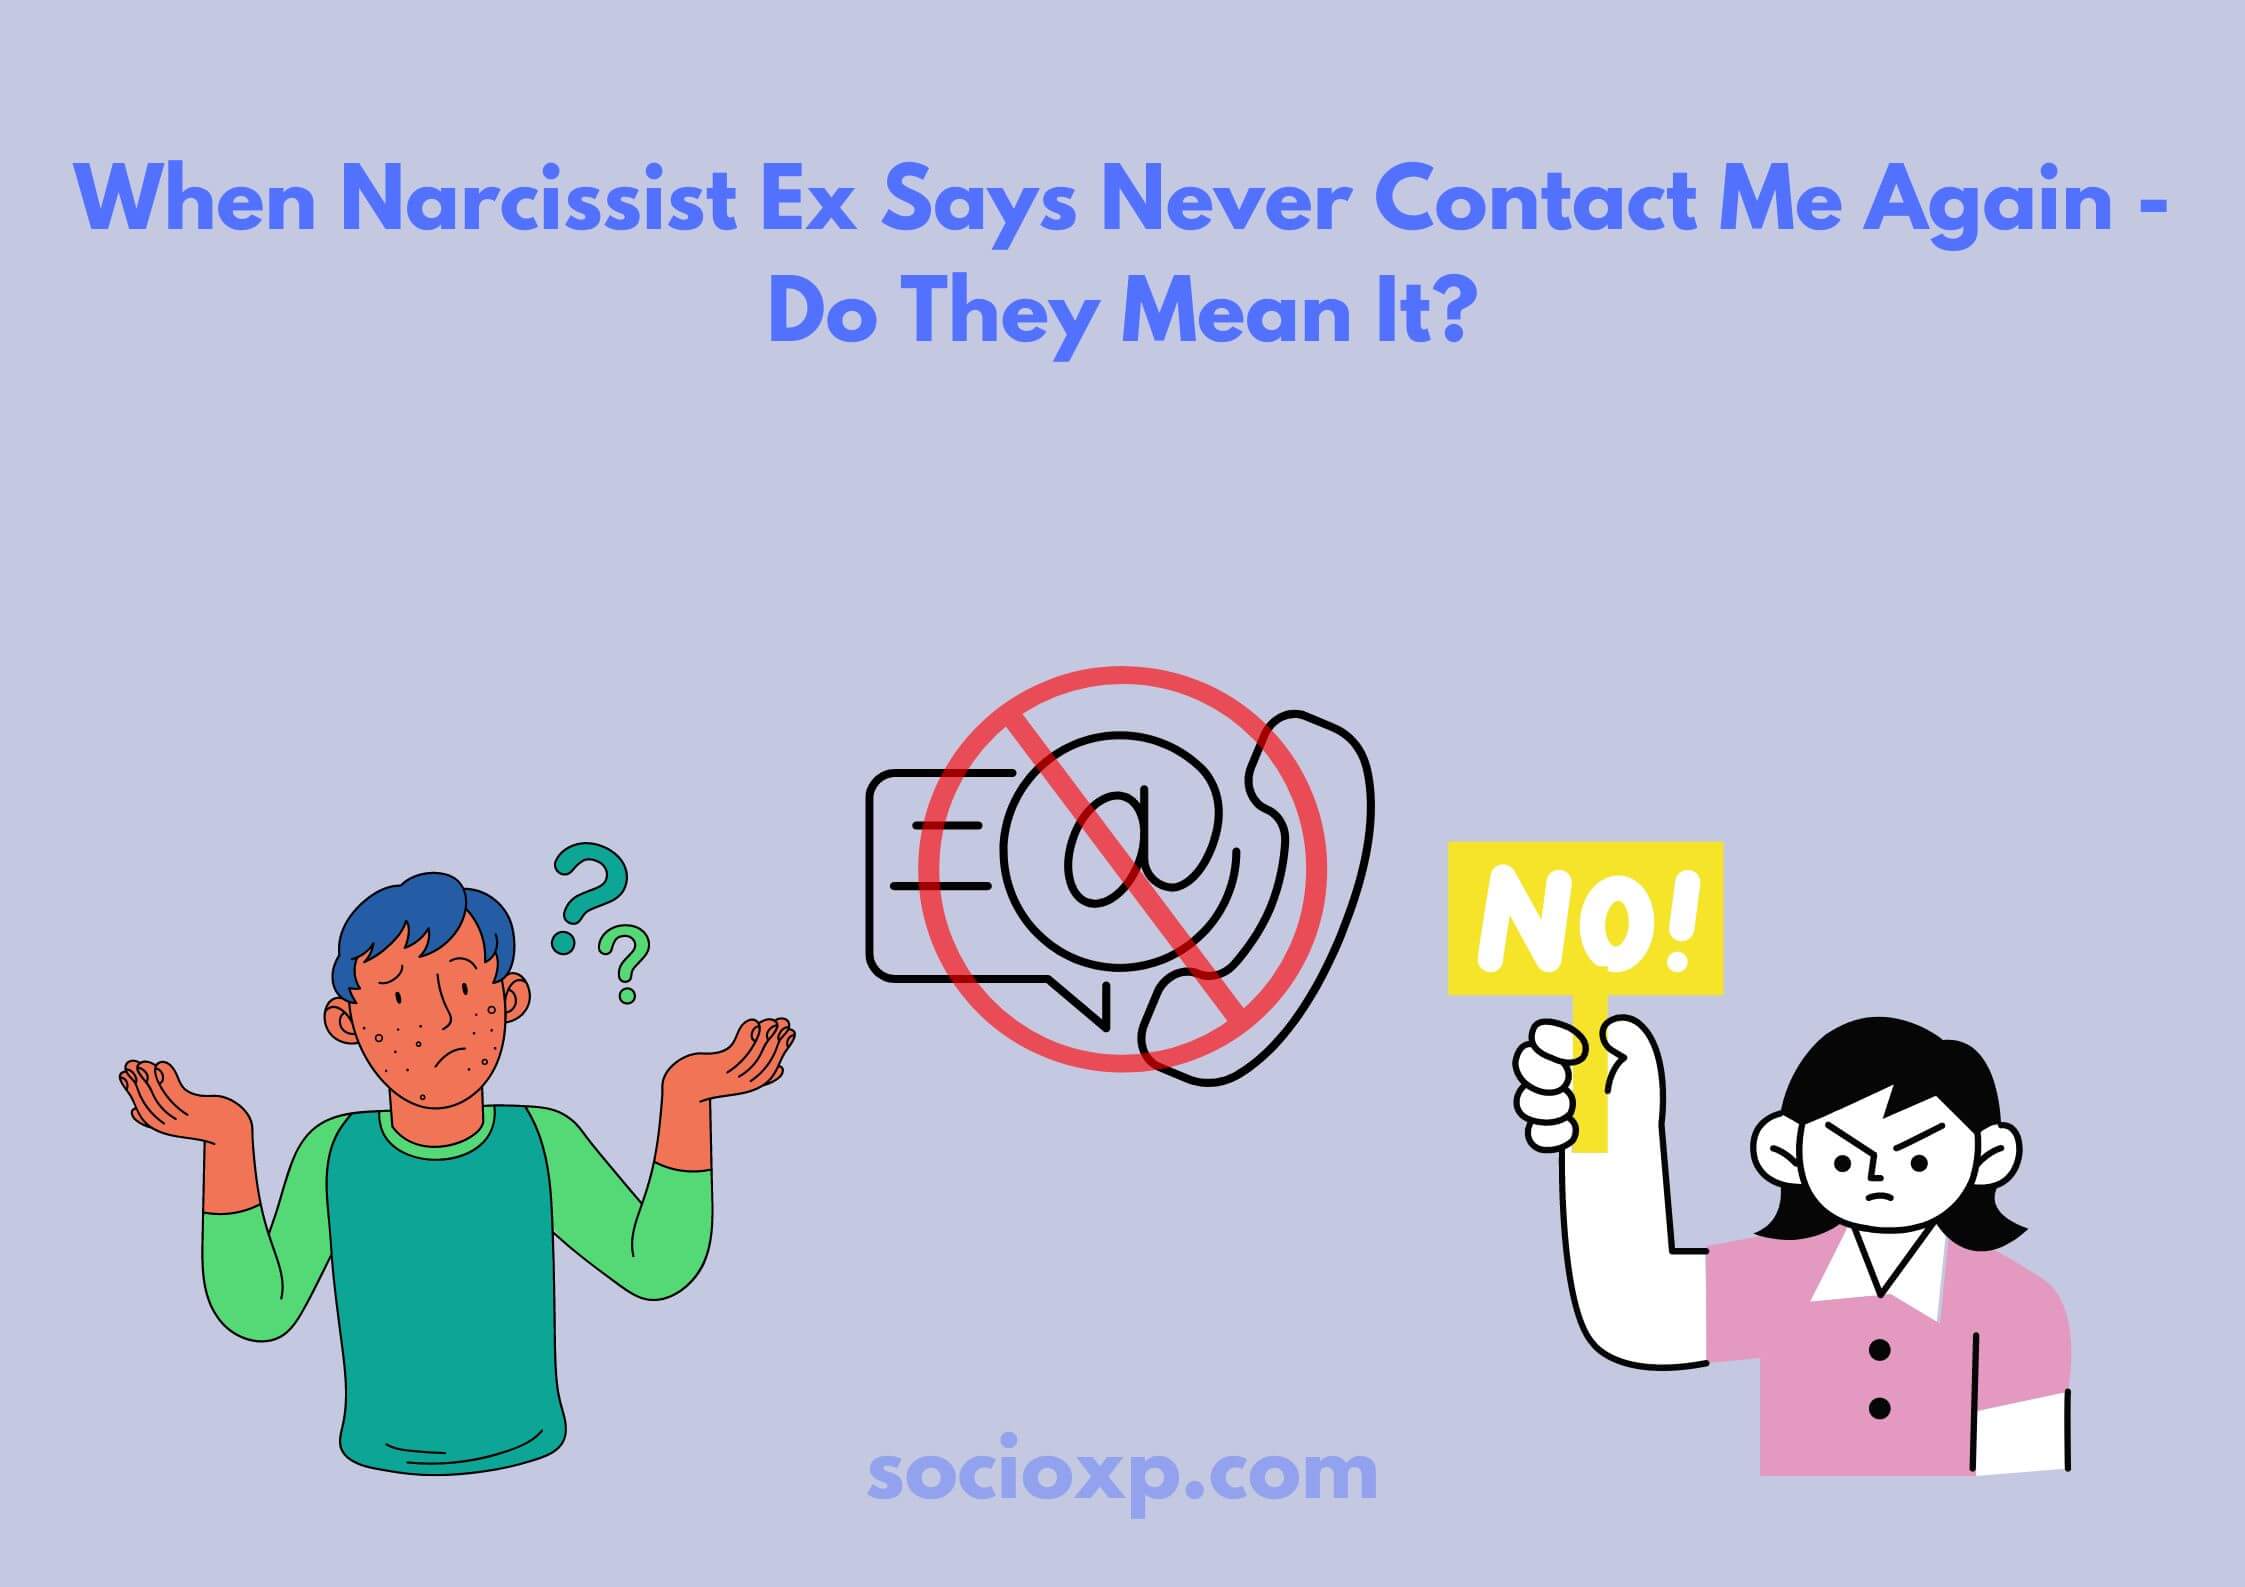 When Narcissist Ex Says Never Contact Me Again Do They Mean It?